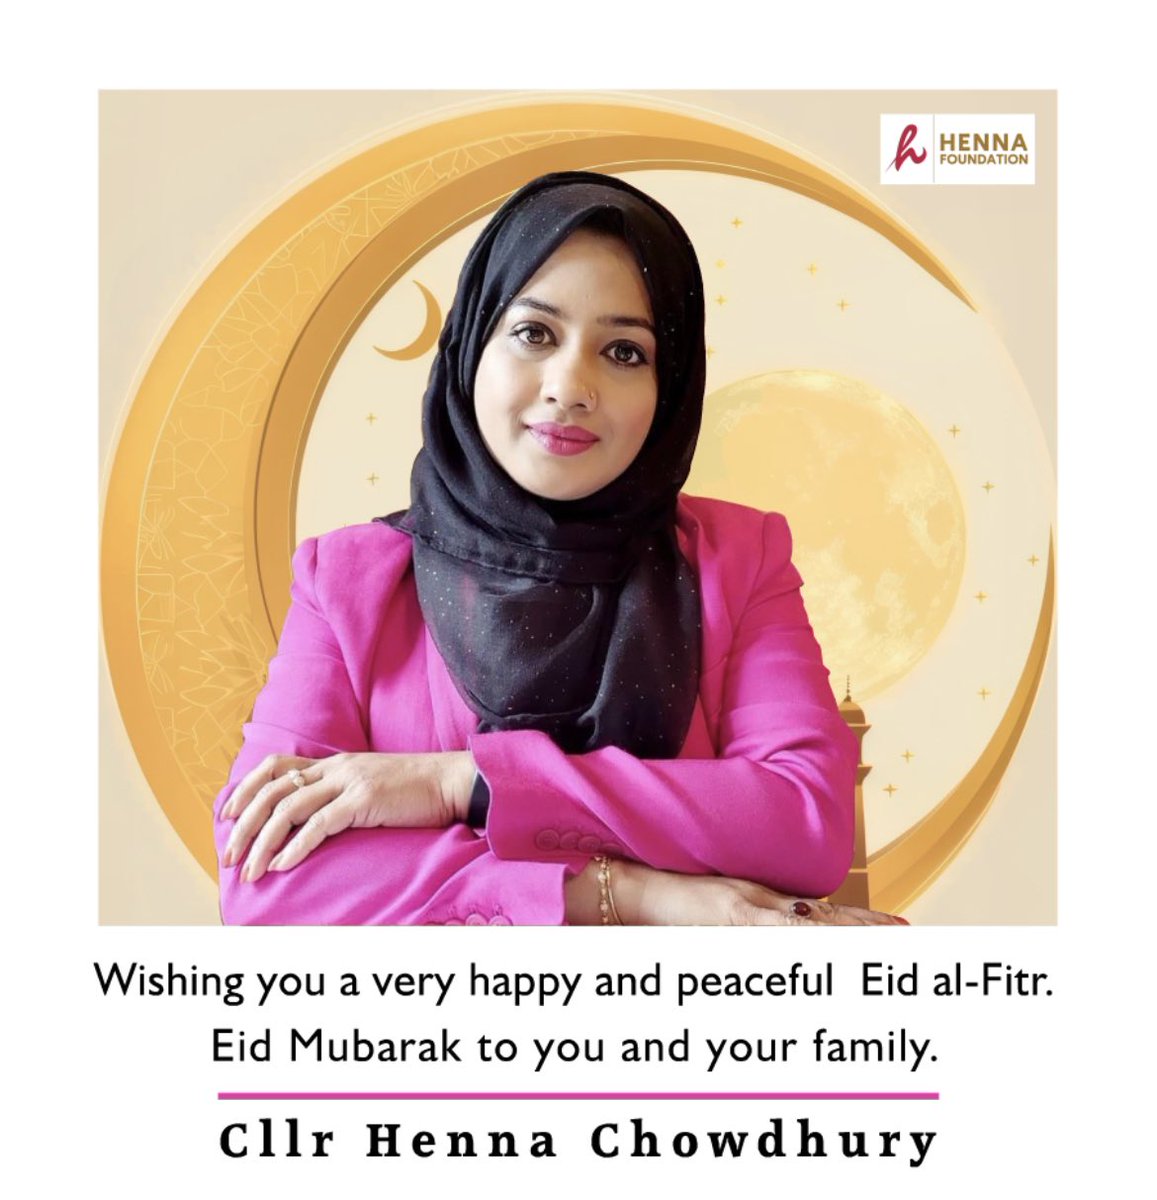 Wishing everyone who is celebrating a happy Eid with your family